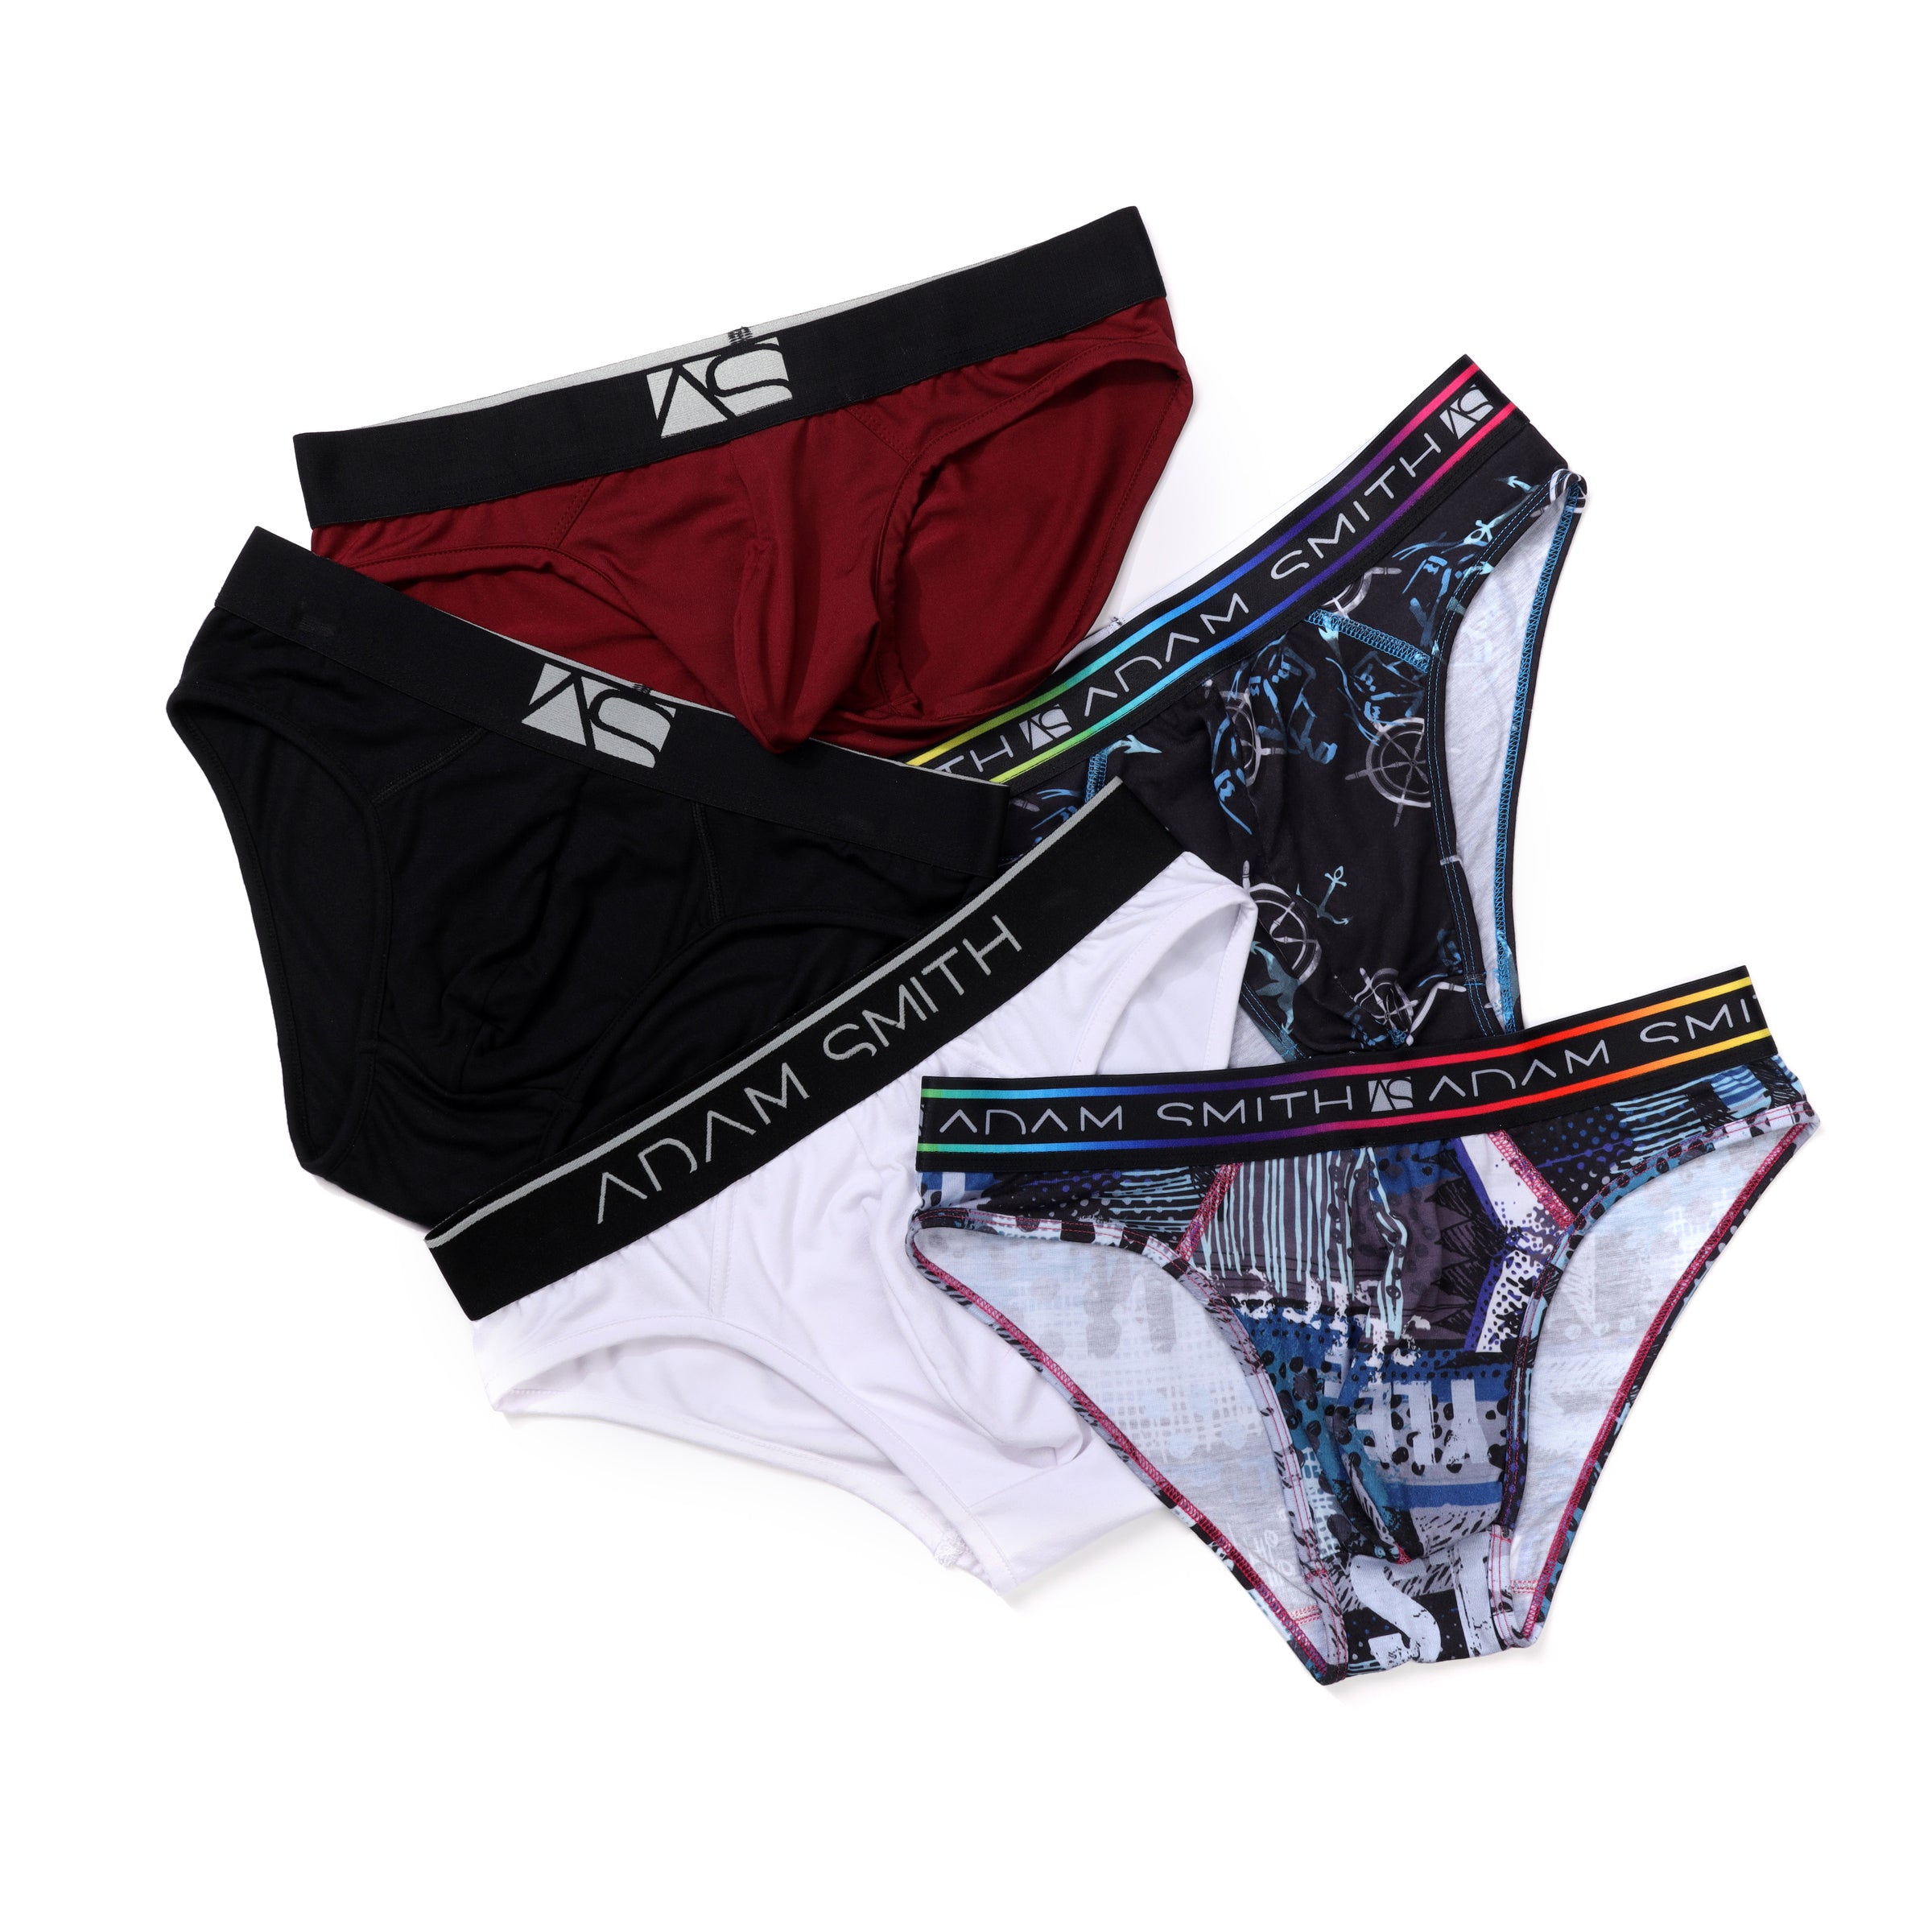 Top 7 Things To Look Out For When Packing Travel Underwear – Adam Smith Wear